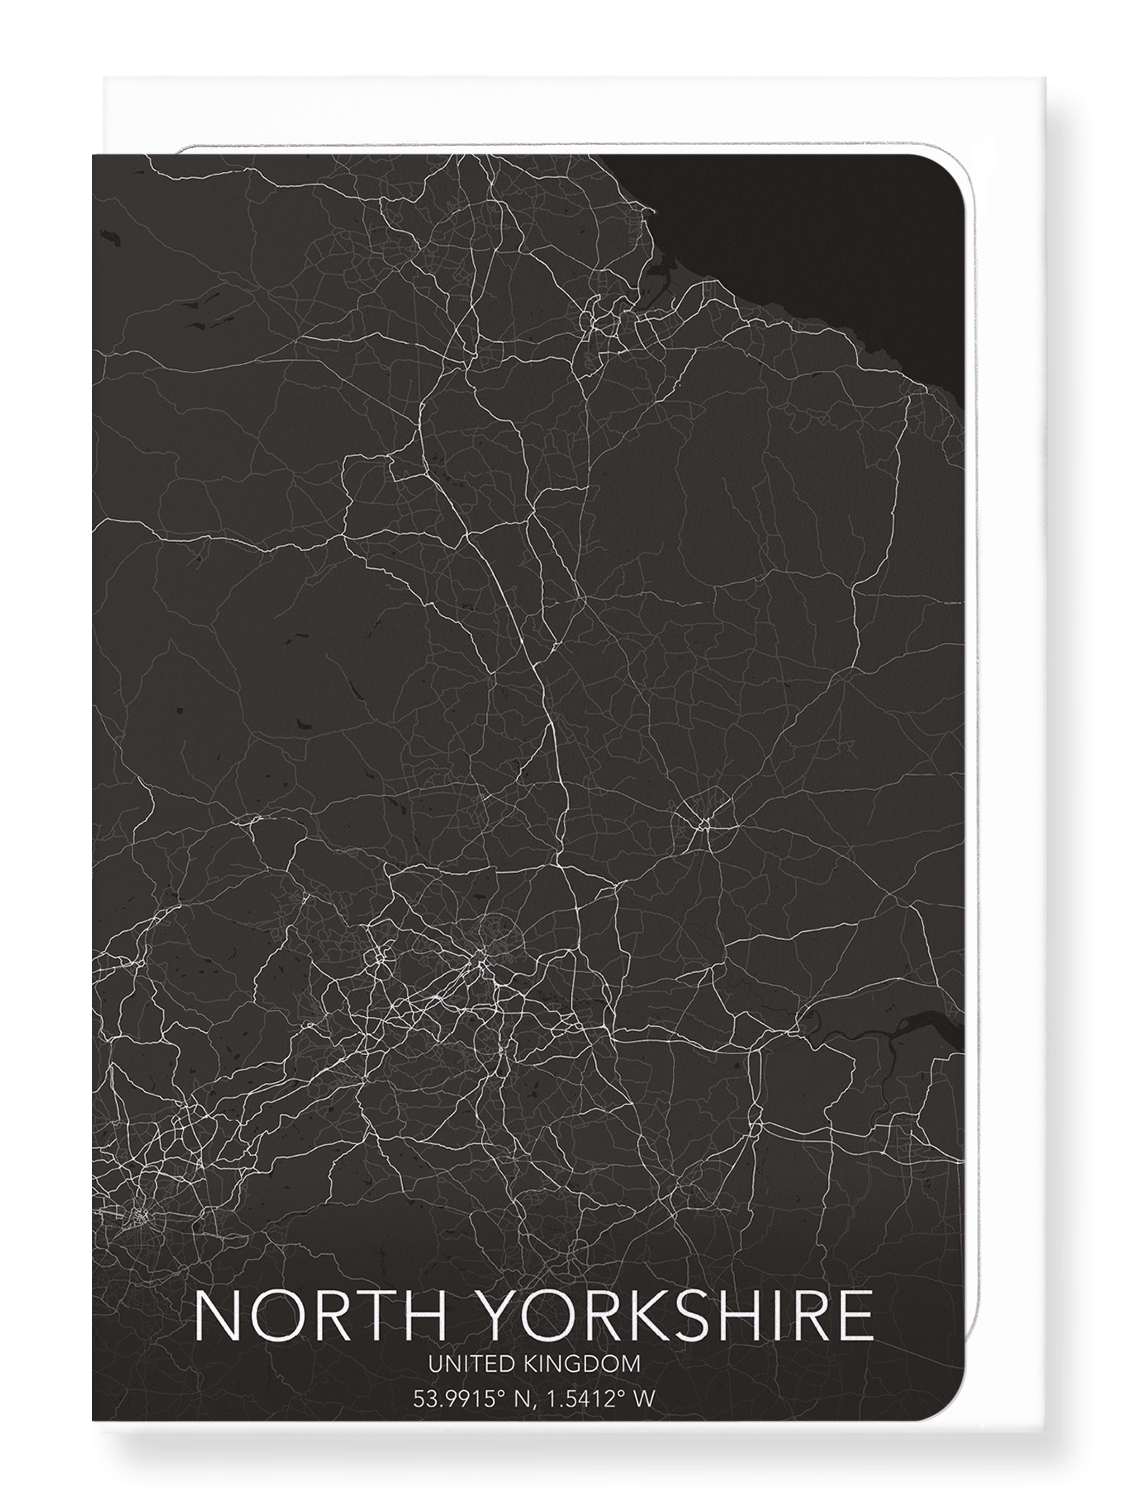 NORTH YORKSHIRE FULL MAP: 8xCards